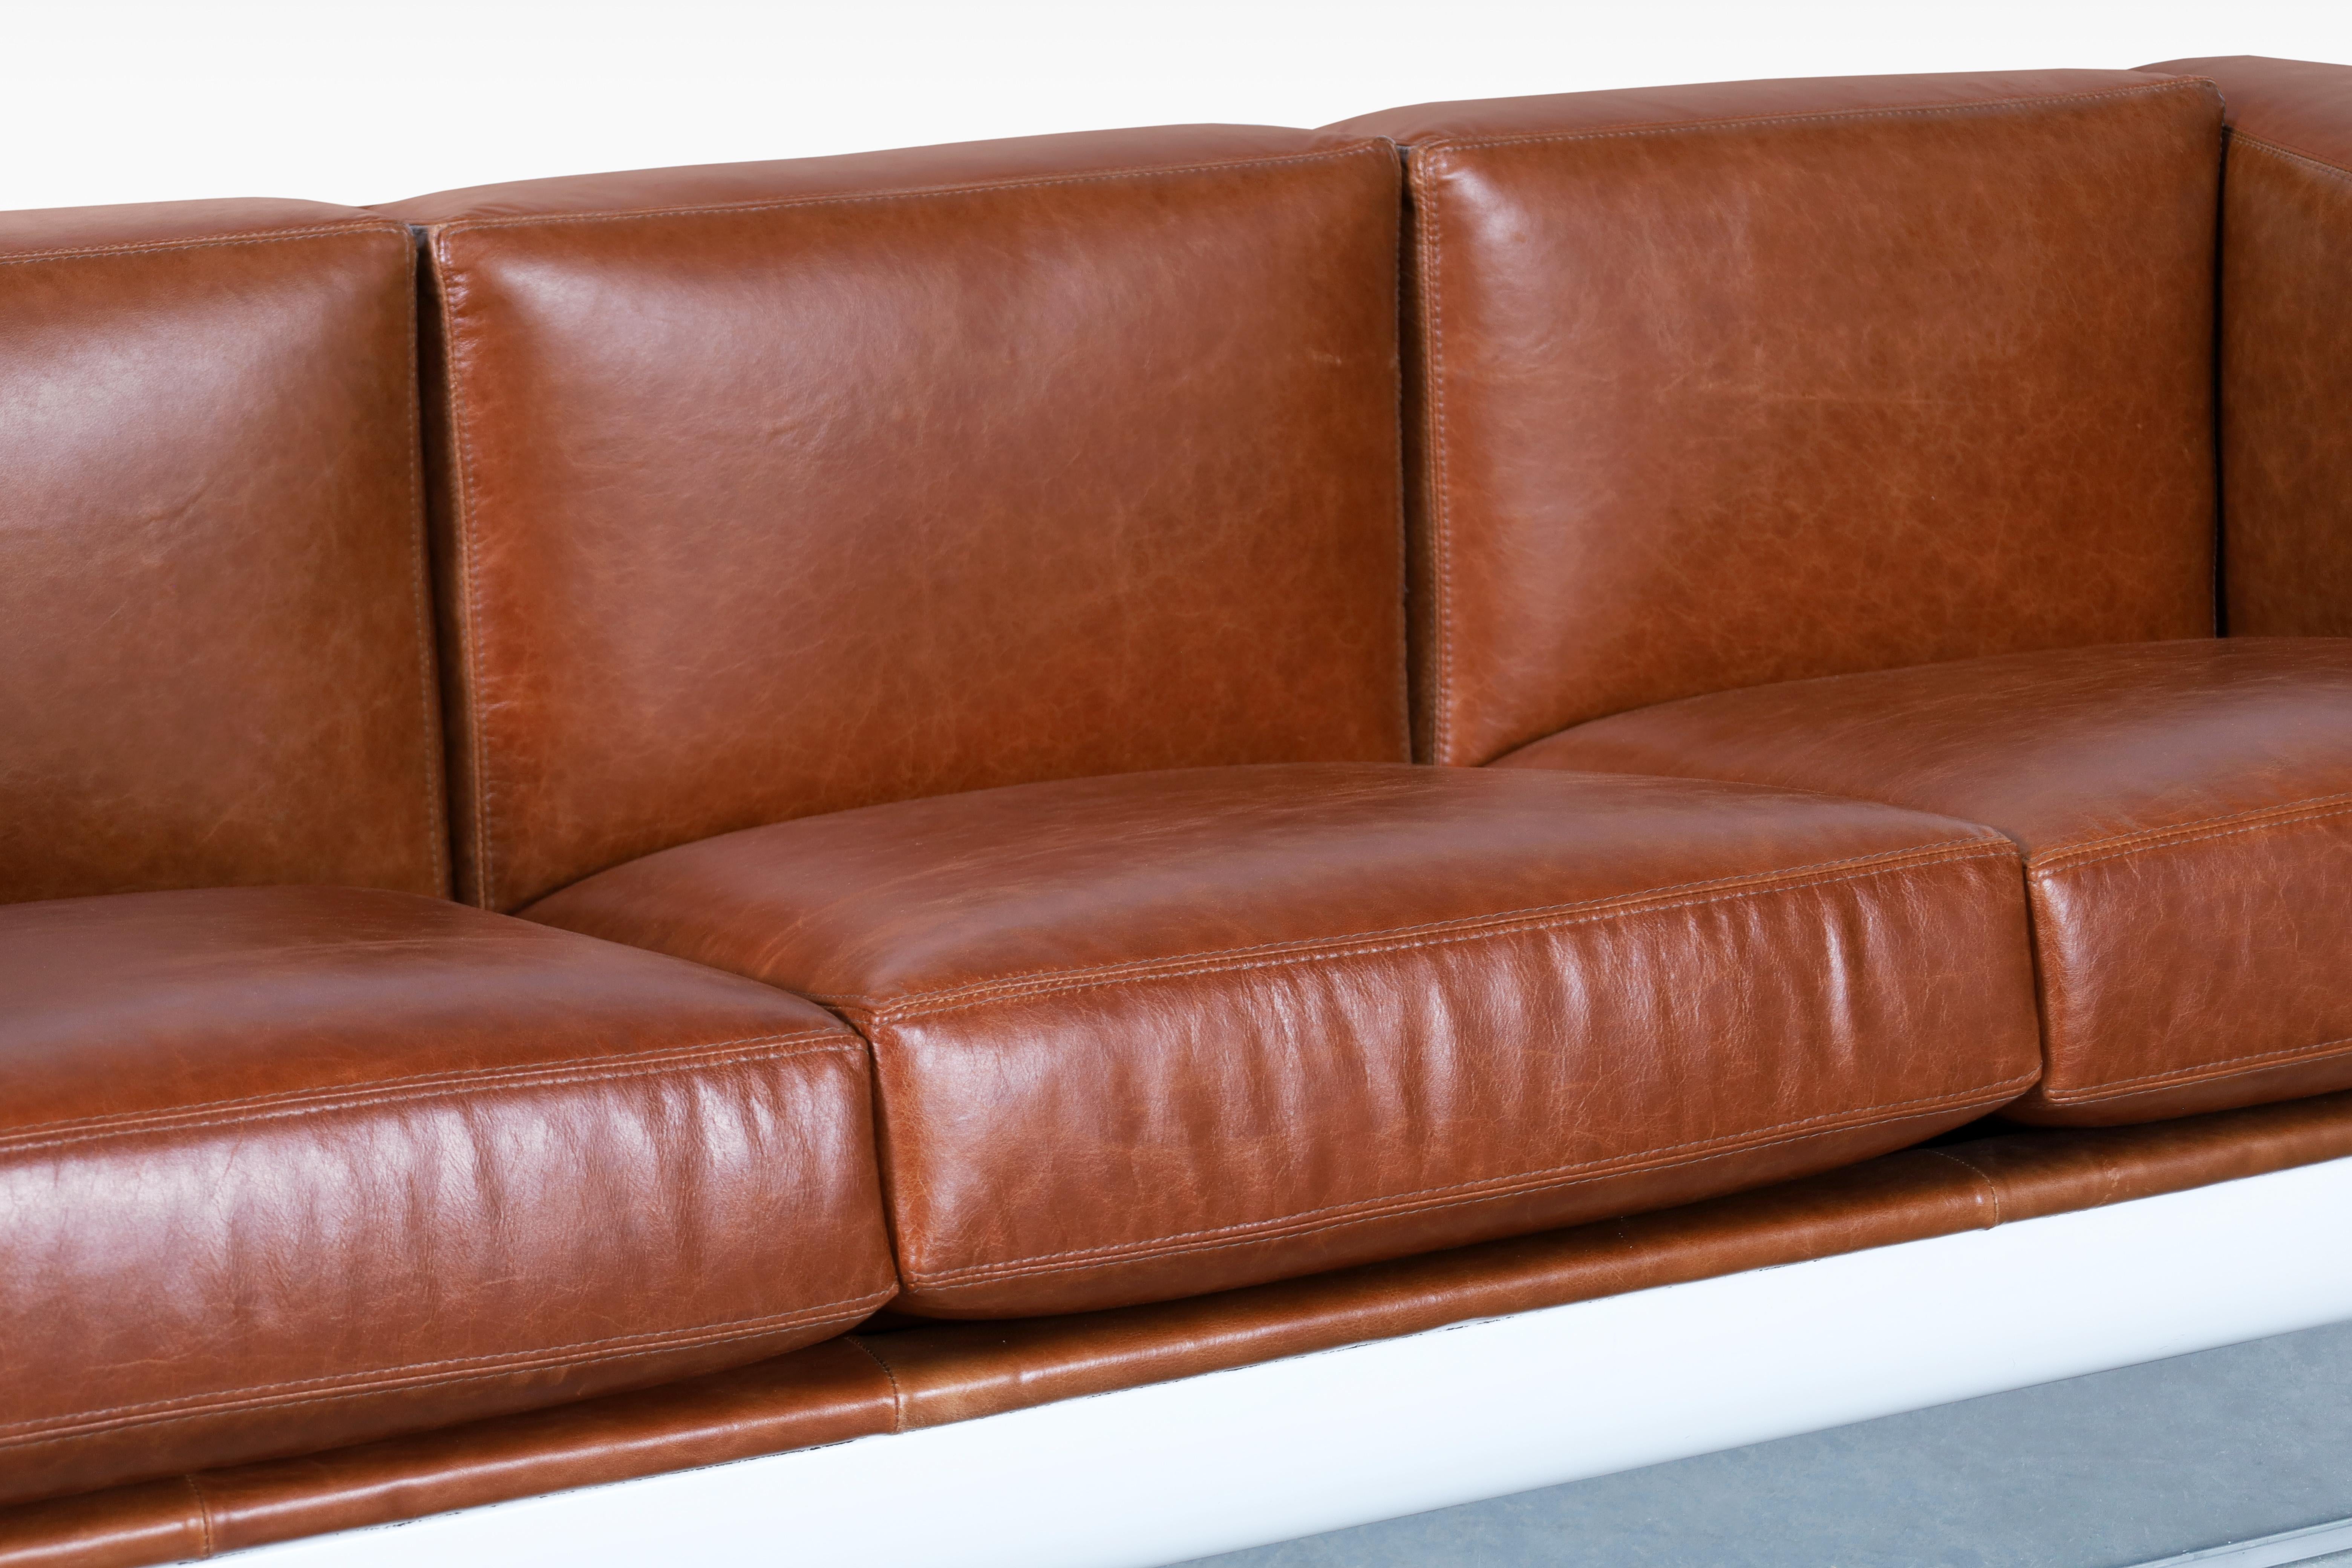 Vintage Leather and Lucite Floating Sofa by William C. Andrus for Steelcase In Excellent Condition For Sale In North Hollywood, CA